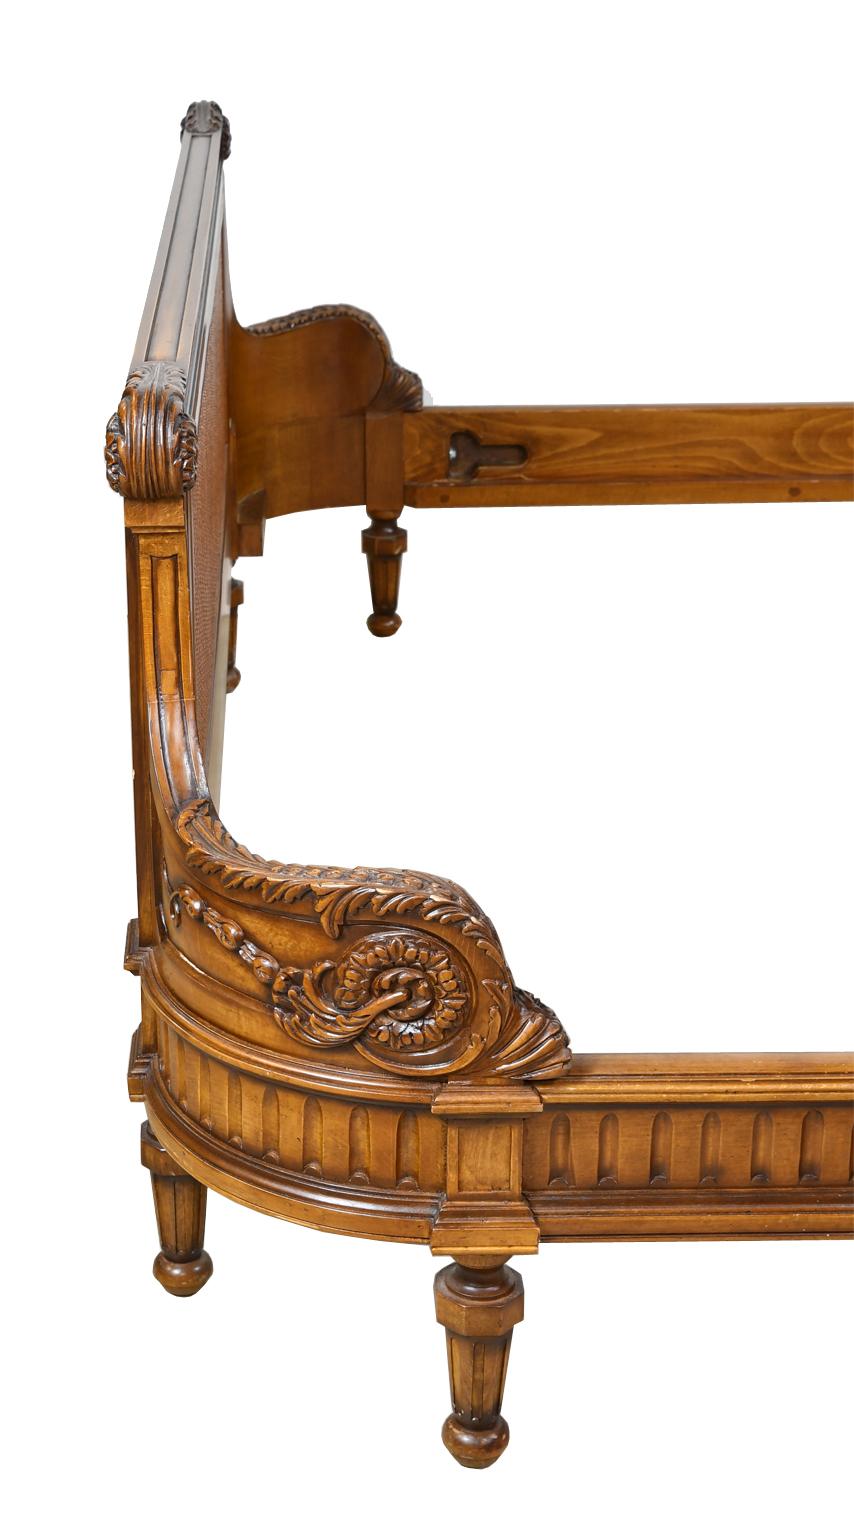 Cane Louis XVI Style King Size Bed with Walnut-Colored Wood Frame and Woven Caning